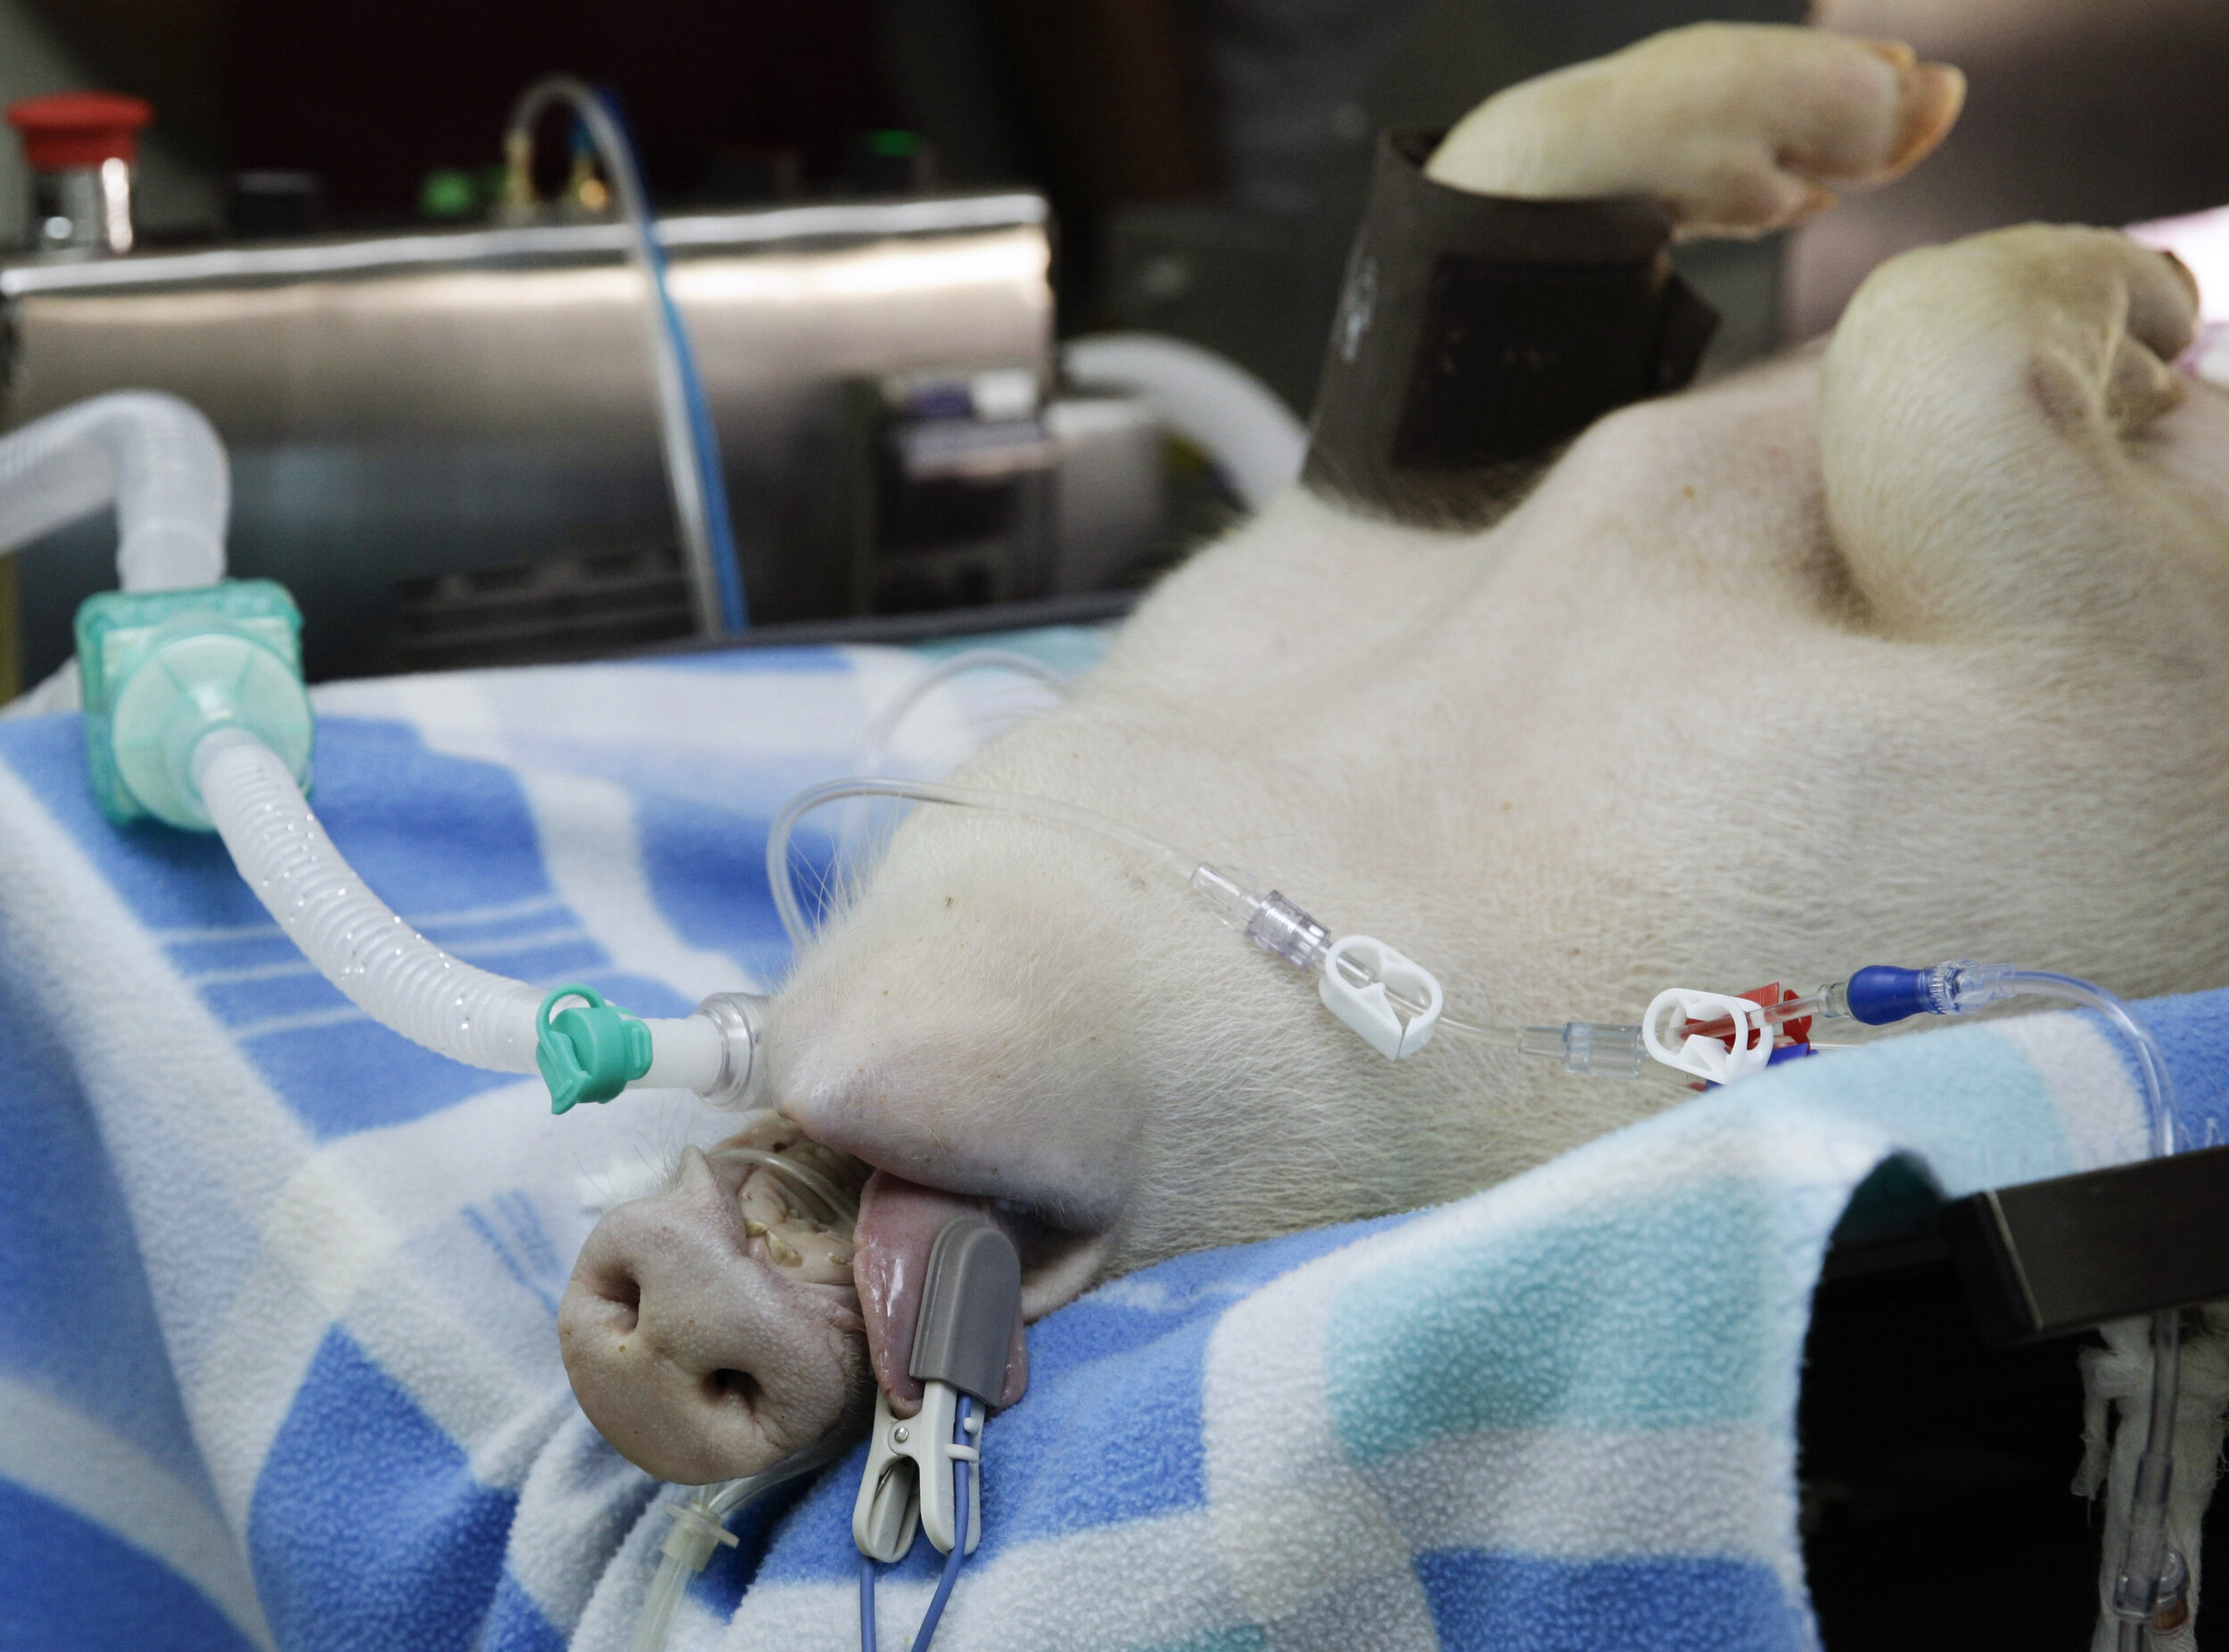  A pig is connected to a ventilator prototype at the Veterinarian school at the National University where doctors, engineers, veterinarians, and researchers test it on pigs with lung injuries as part of a project to manufacture mechanical ventilators